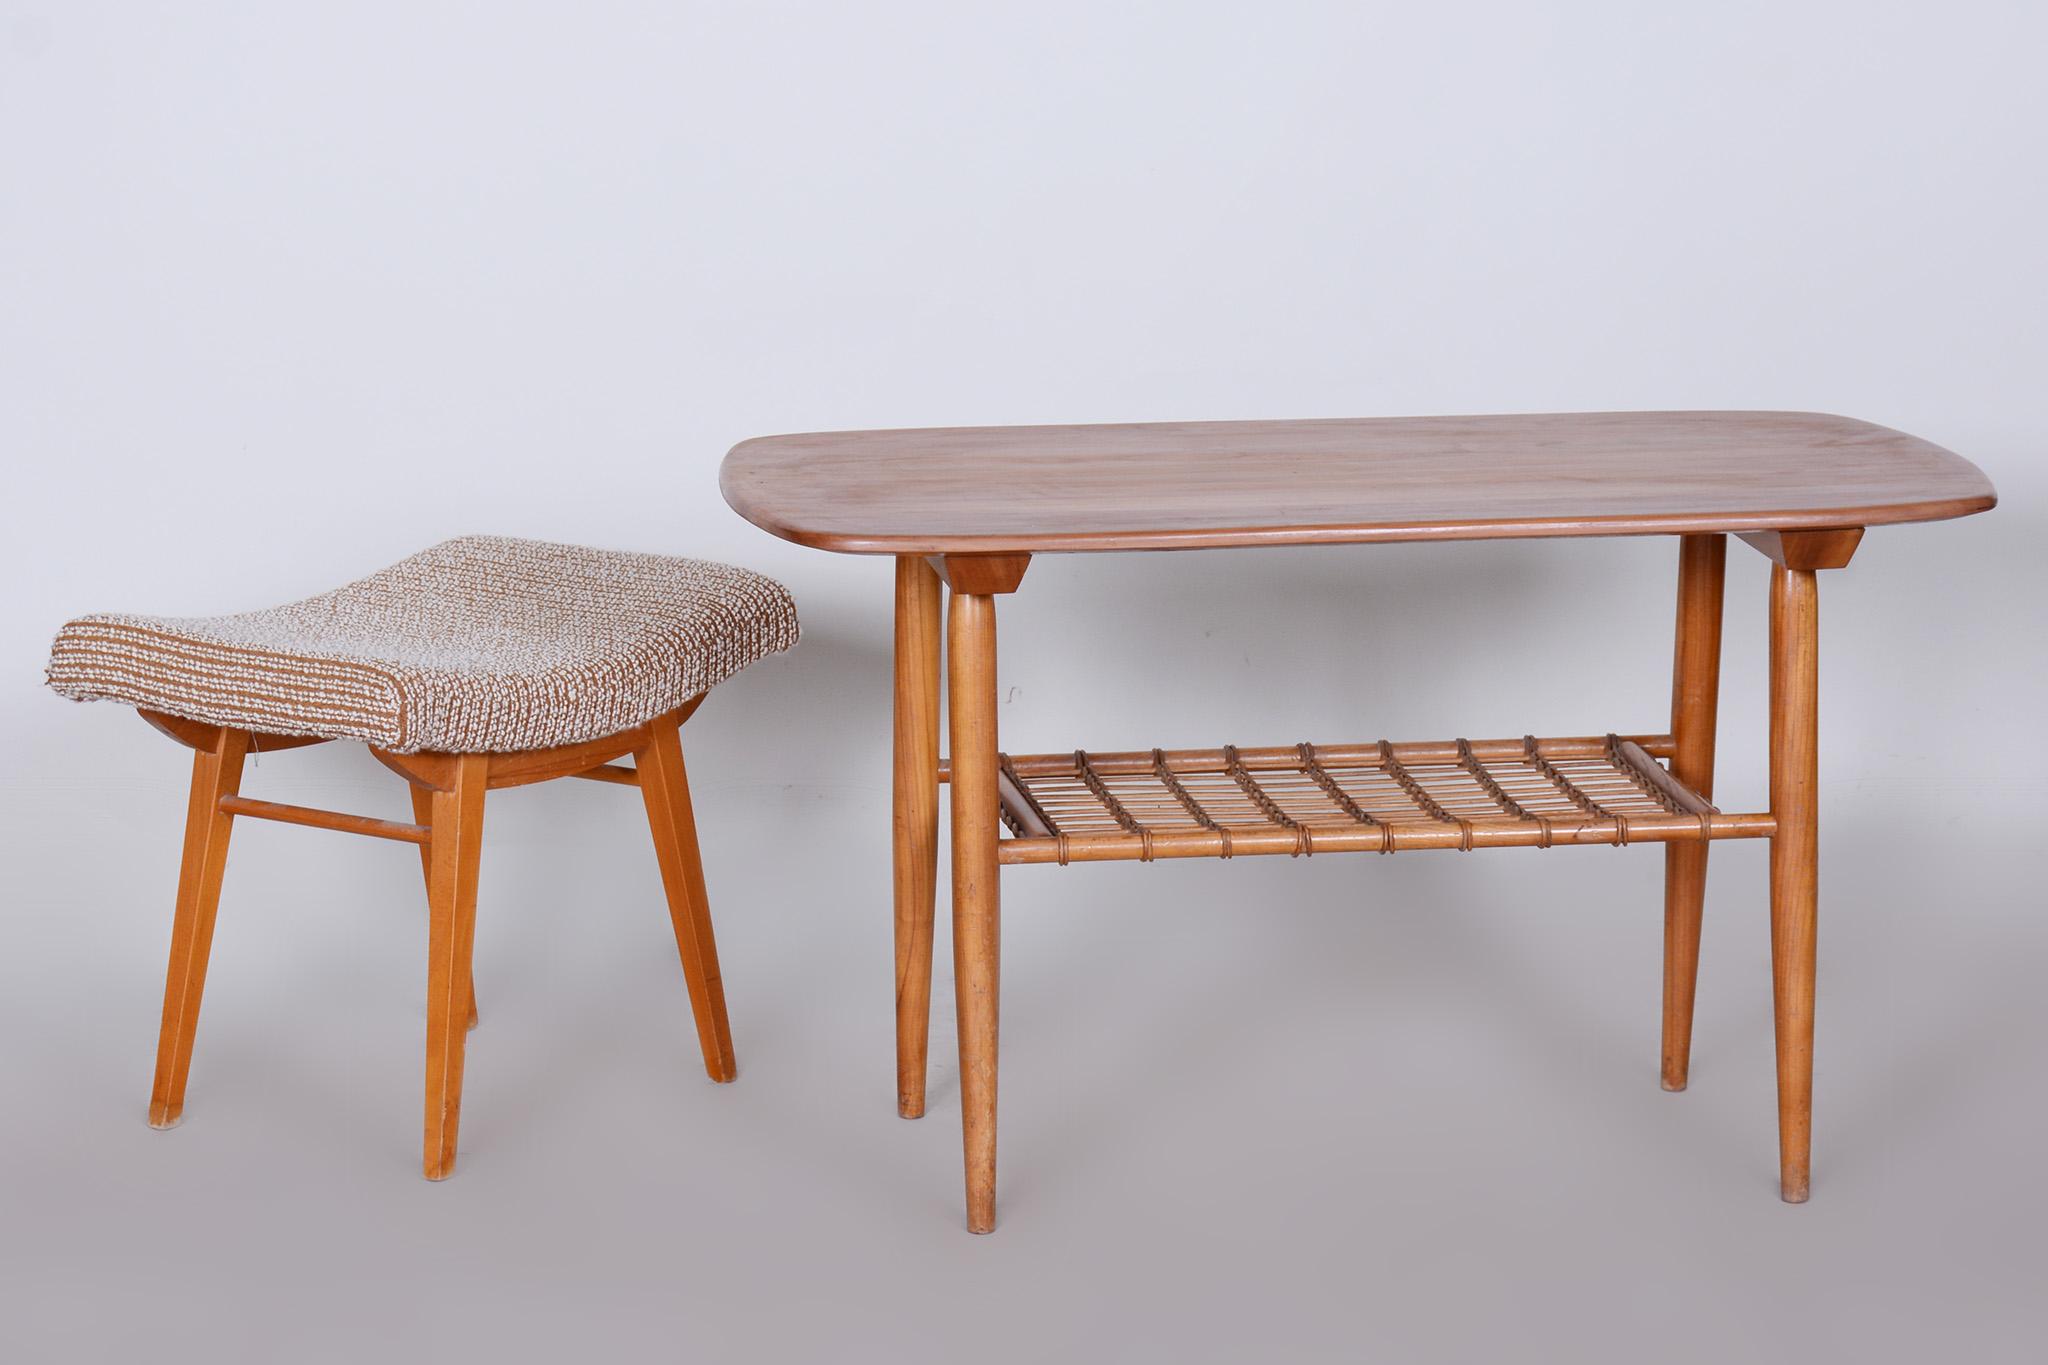 Restored Mid-Century Style Coffee Table, Cherry-Tree, Rattan, 1950s, Czechia For Sale 5